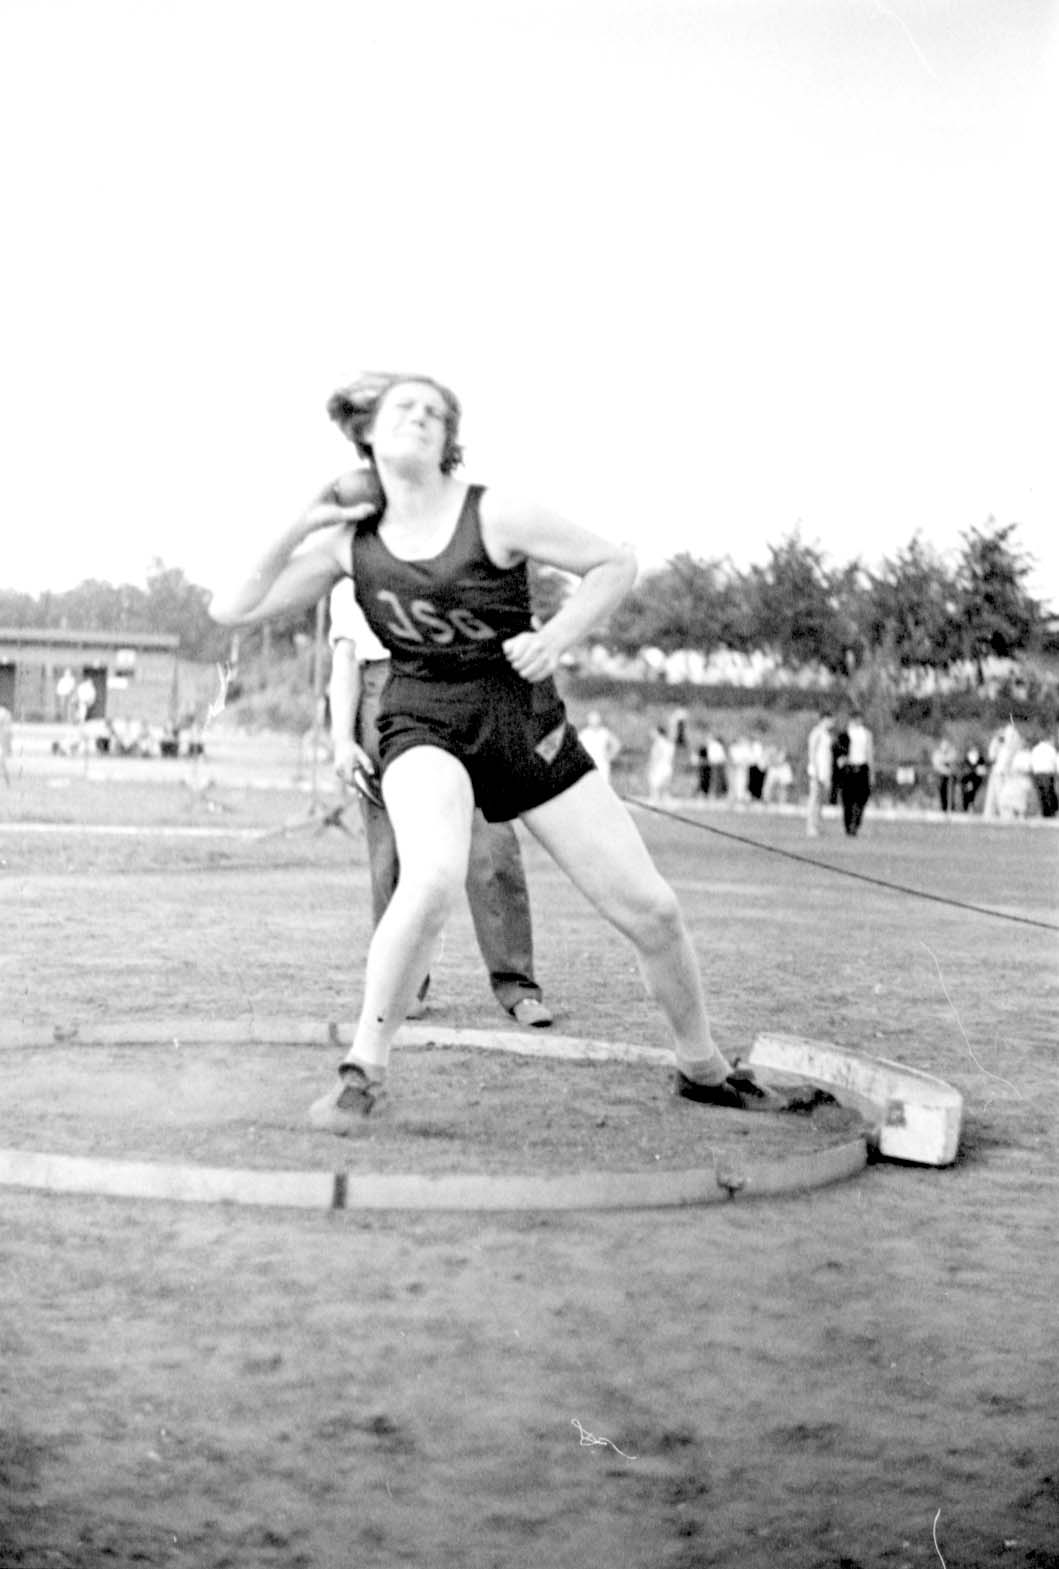 Berlin, Germany, 04/07/1937, Ingeborg Mello, winner of the shot-put competition at a Jewish sports tournament.